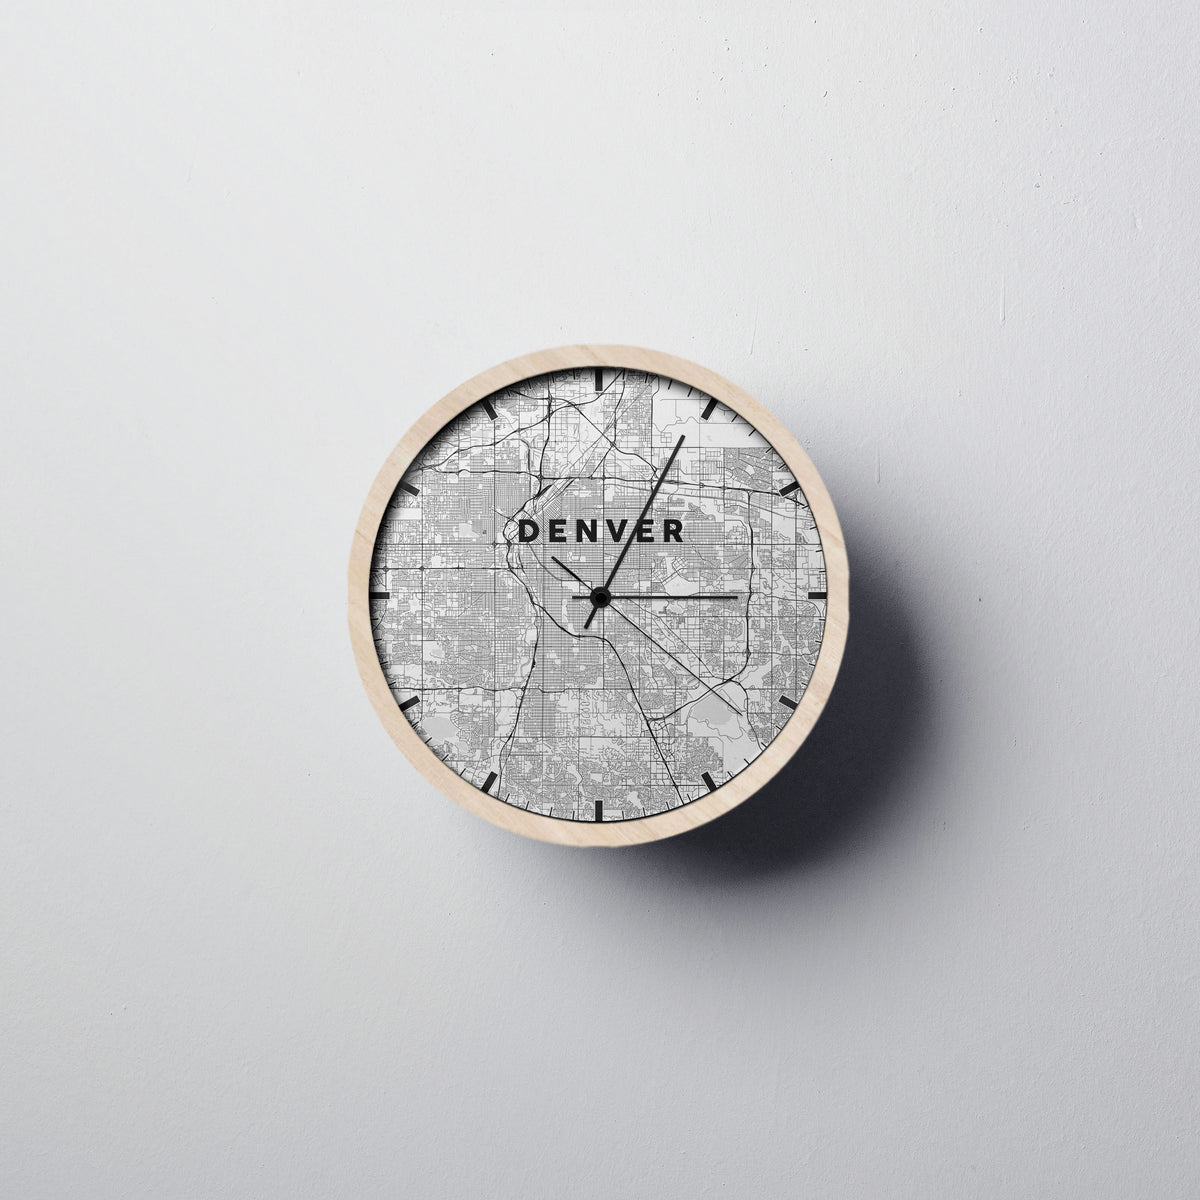 Denver Wall Clock - Point Two Design